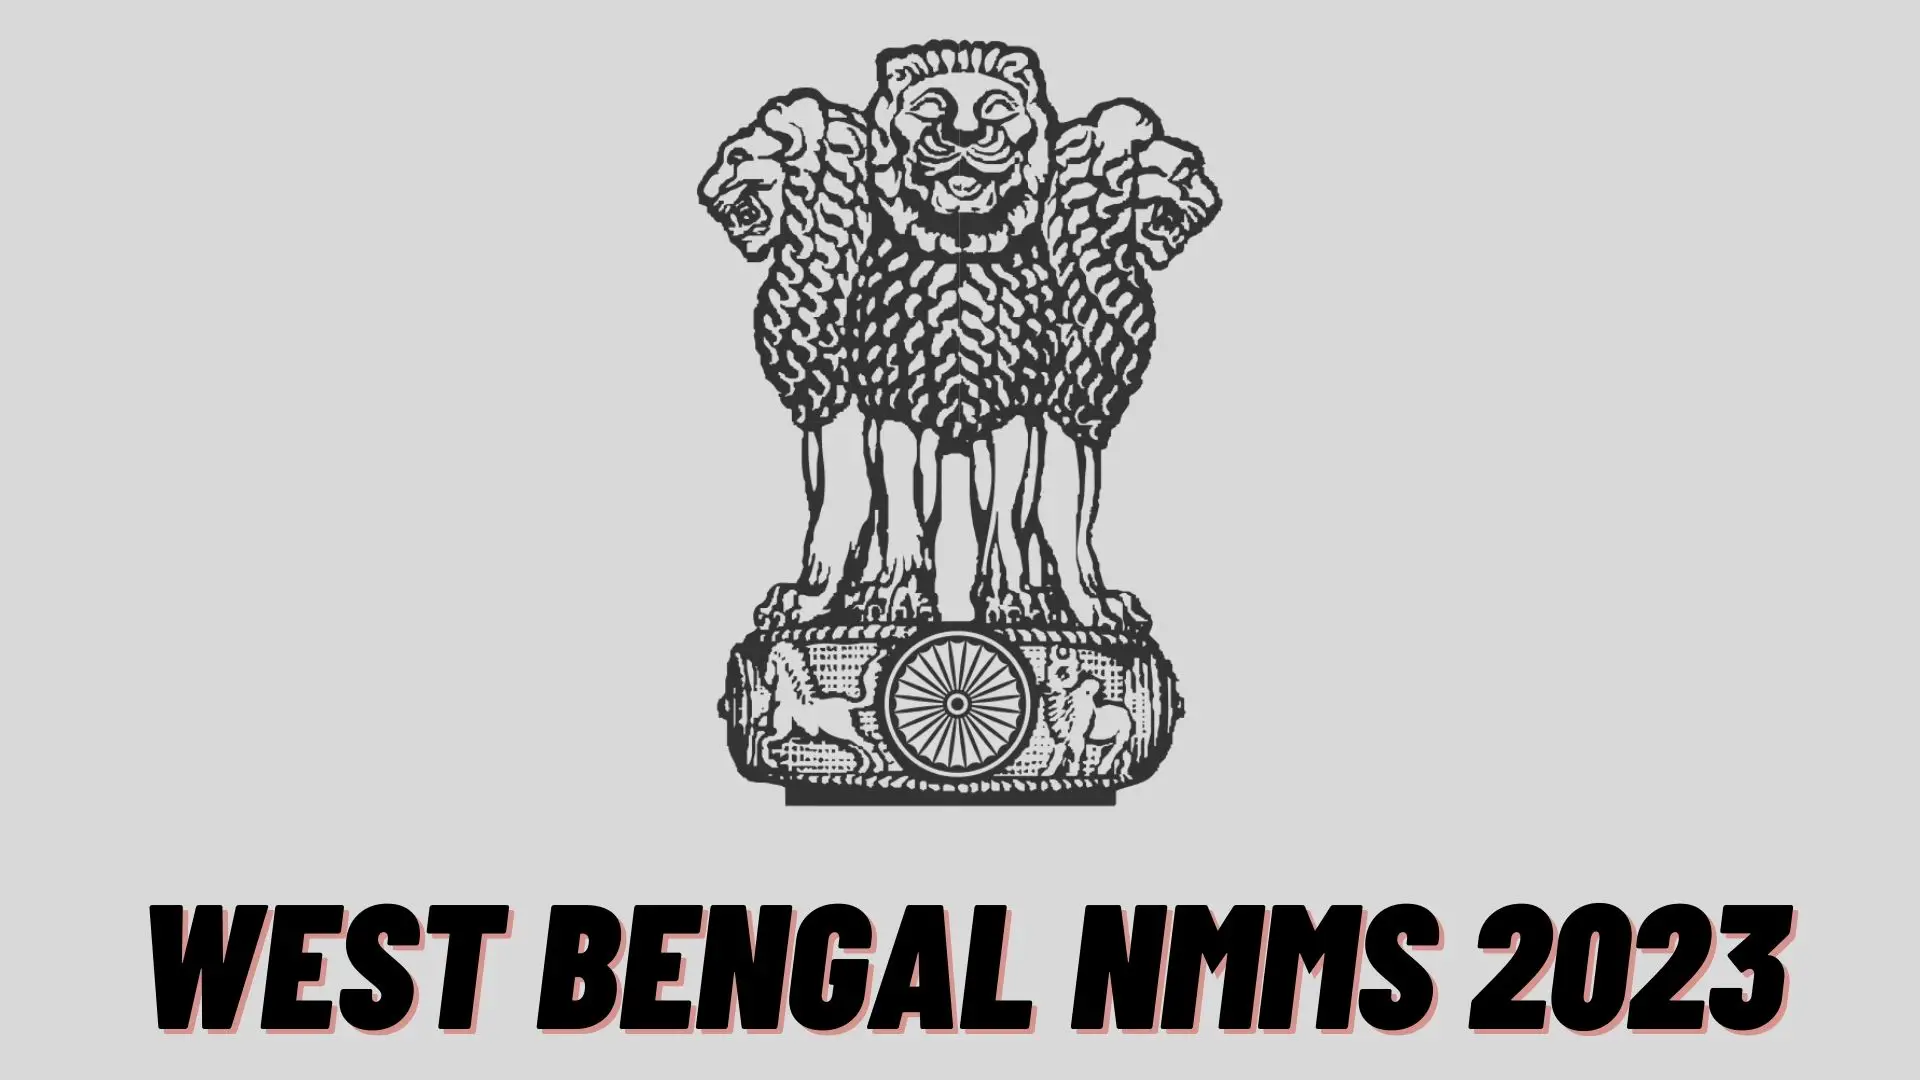 West Bengal NMMS 2023